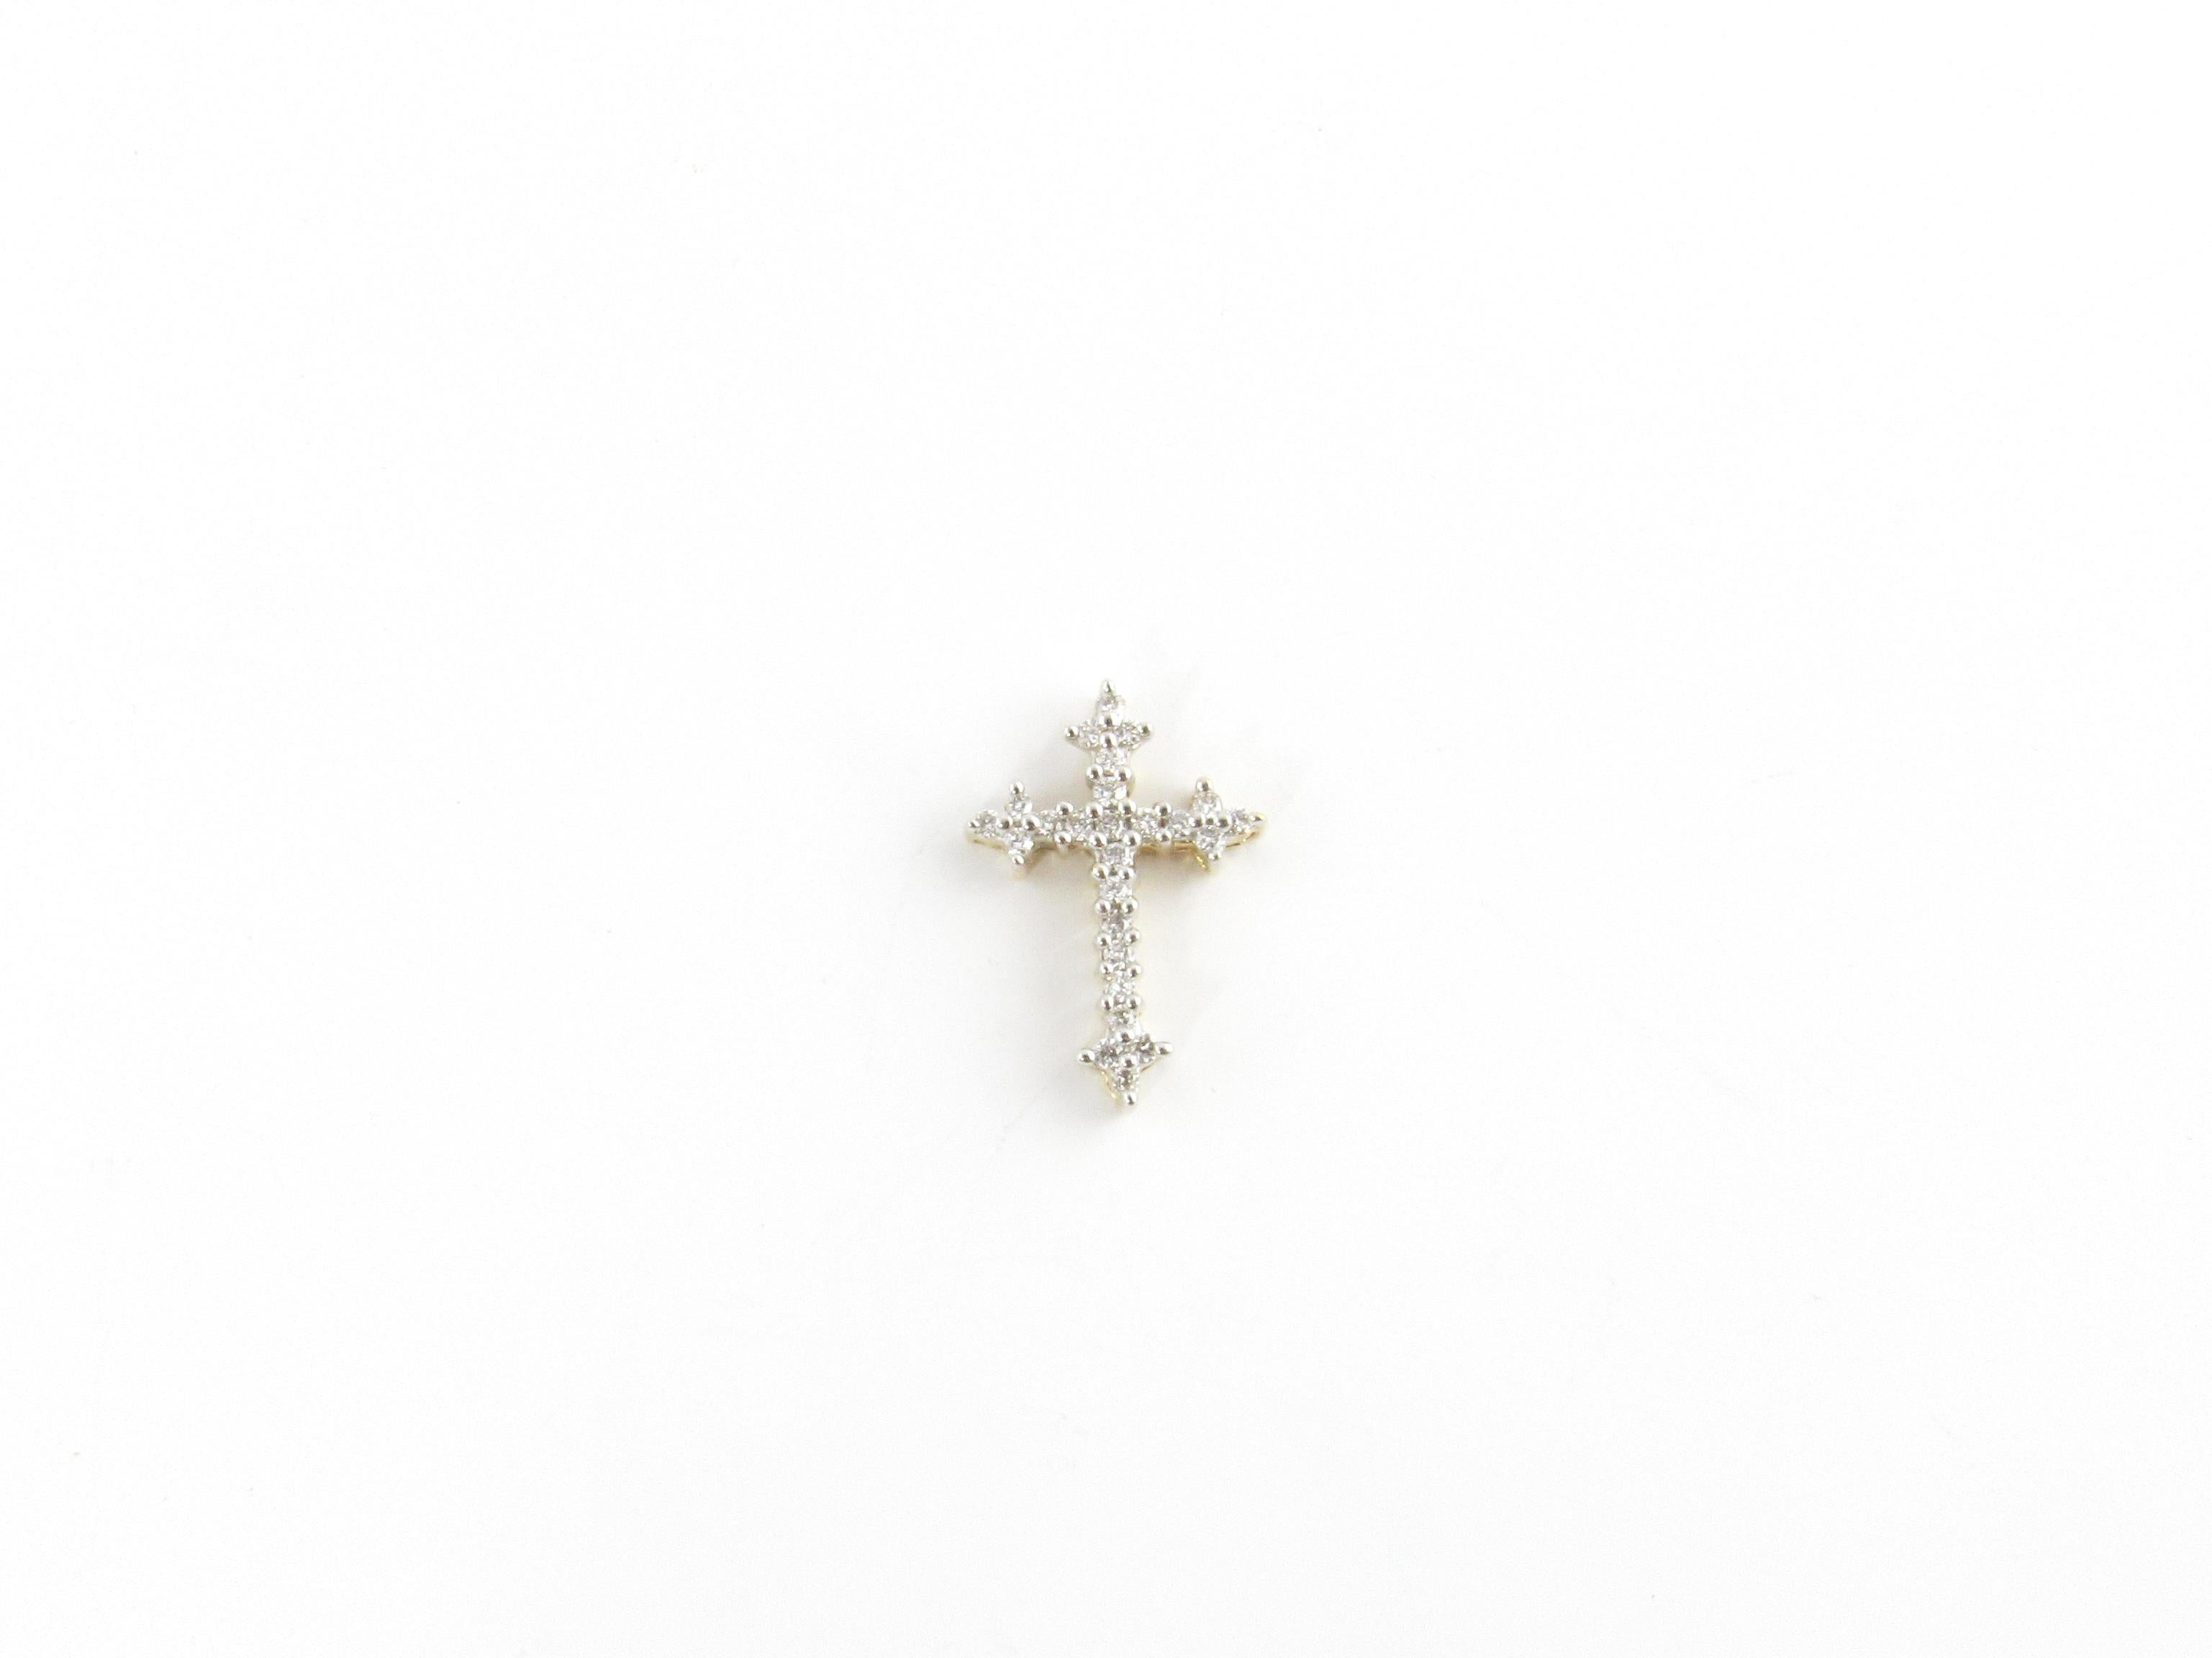 Vintage 14 Karat Yellow Gold Diamond Cross Pendant

This sparkling cross pendant features 25 round brilliant cut diamonds set in classic 14K yellow gold.

Approximate total diamond weight: .25 ct.

Diamond color: H

Diamond clarity: SI1

Size: 20 mm